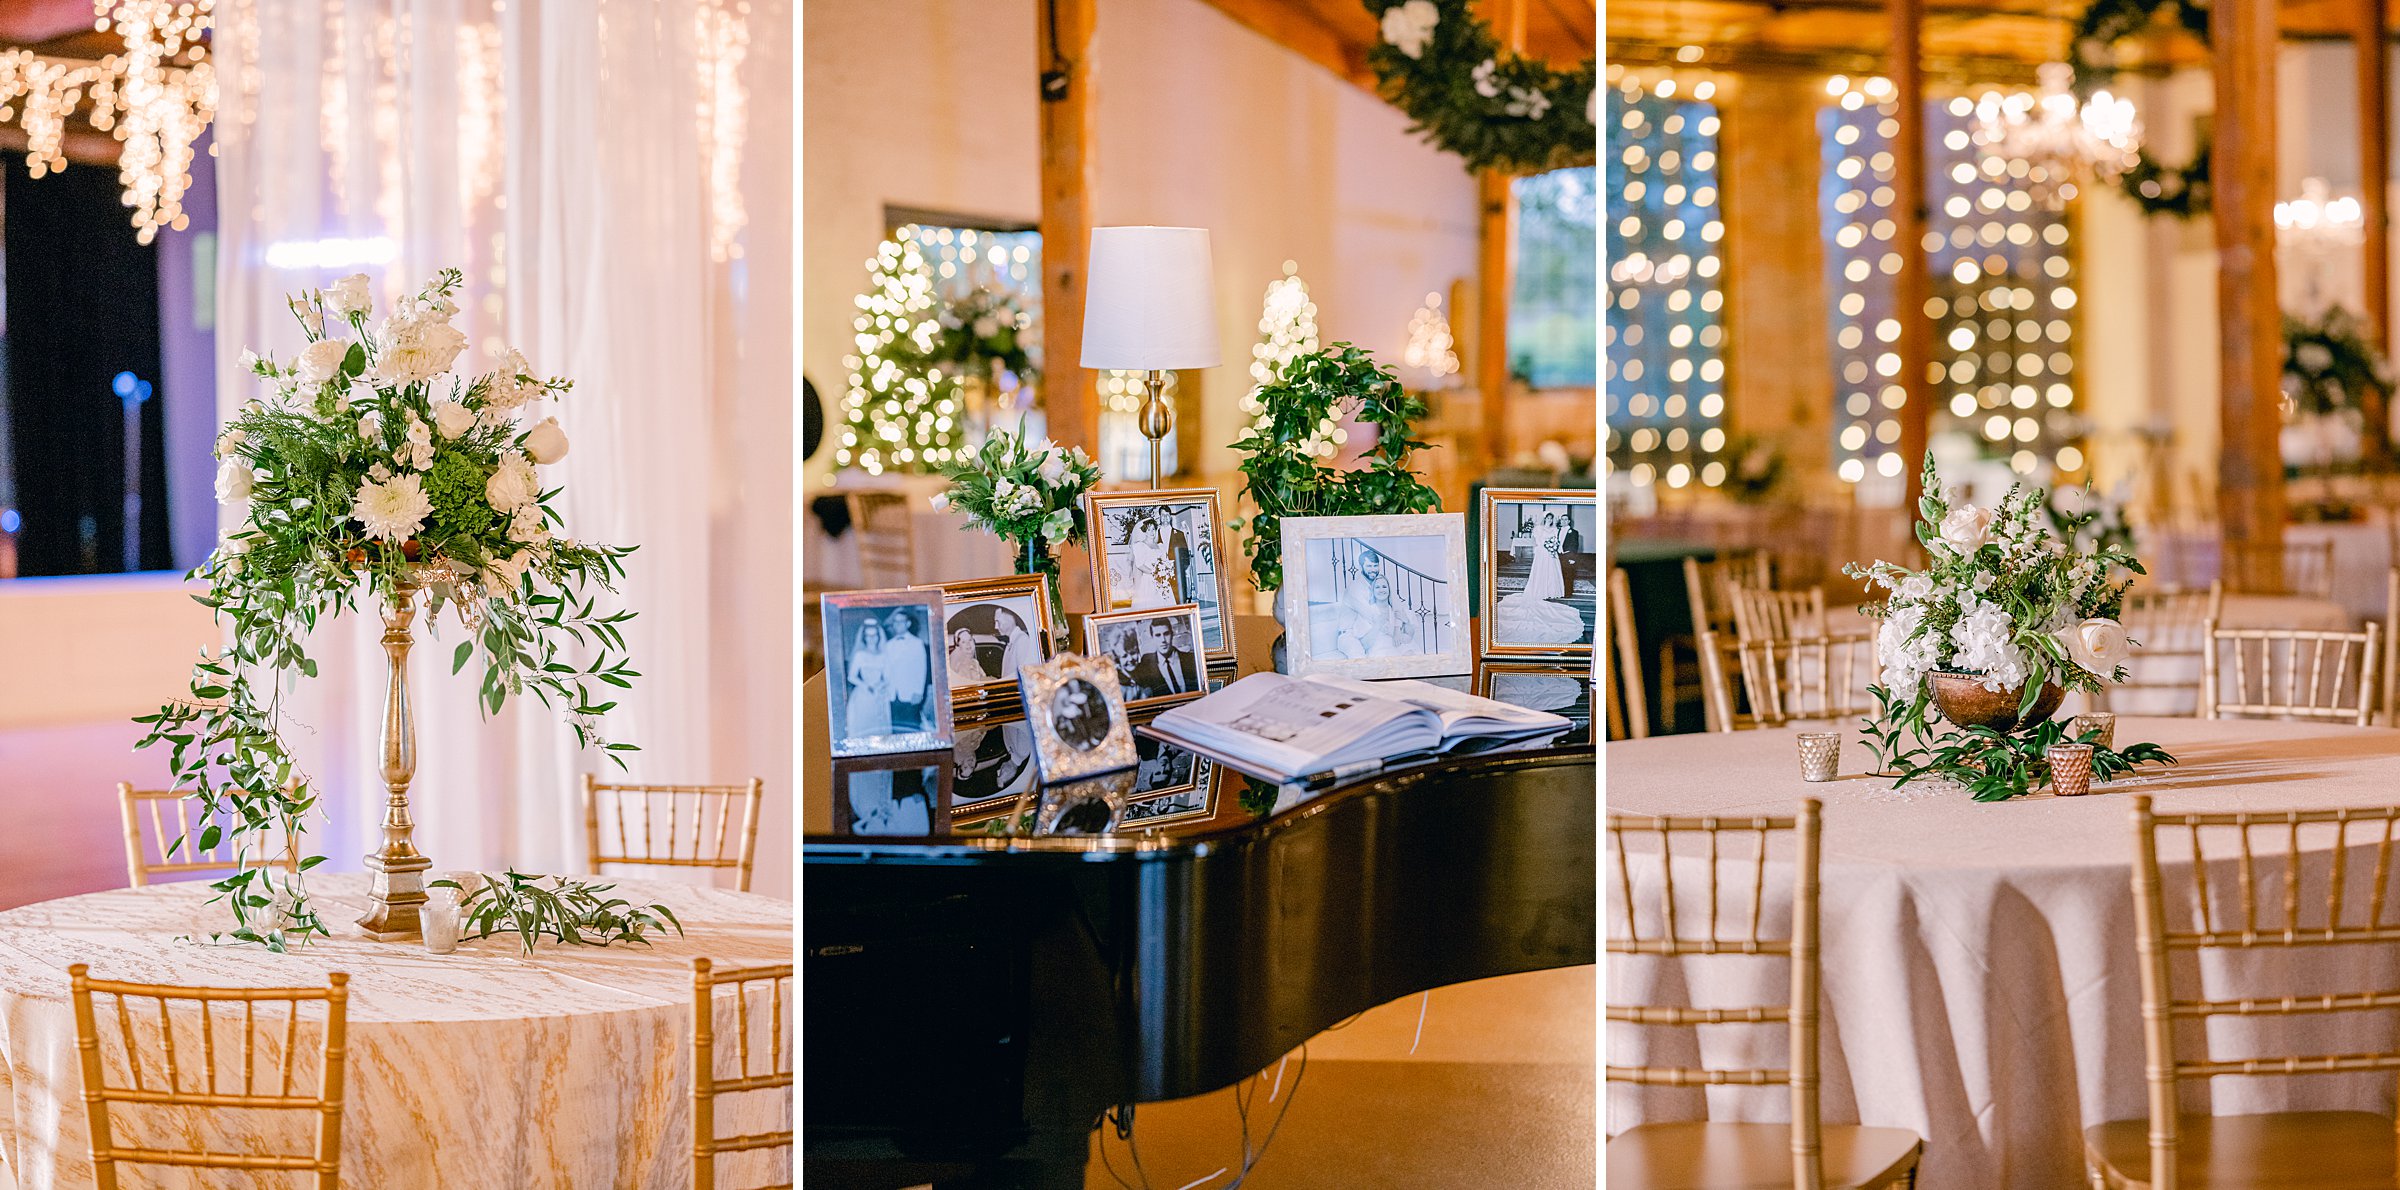 Columbus, Ga wedding at the Bibb Mill a winter wedding wonderland with gold, green, and white